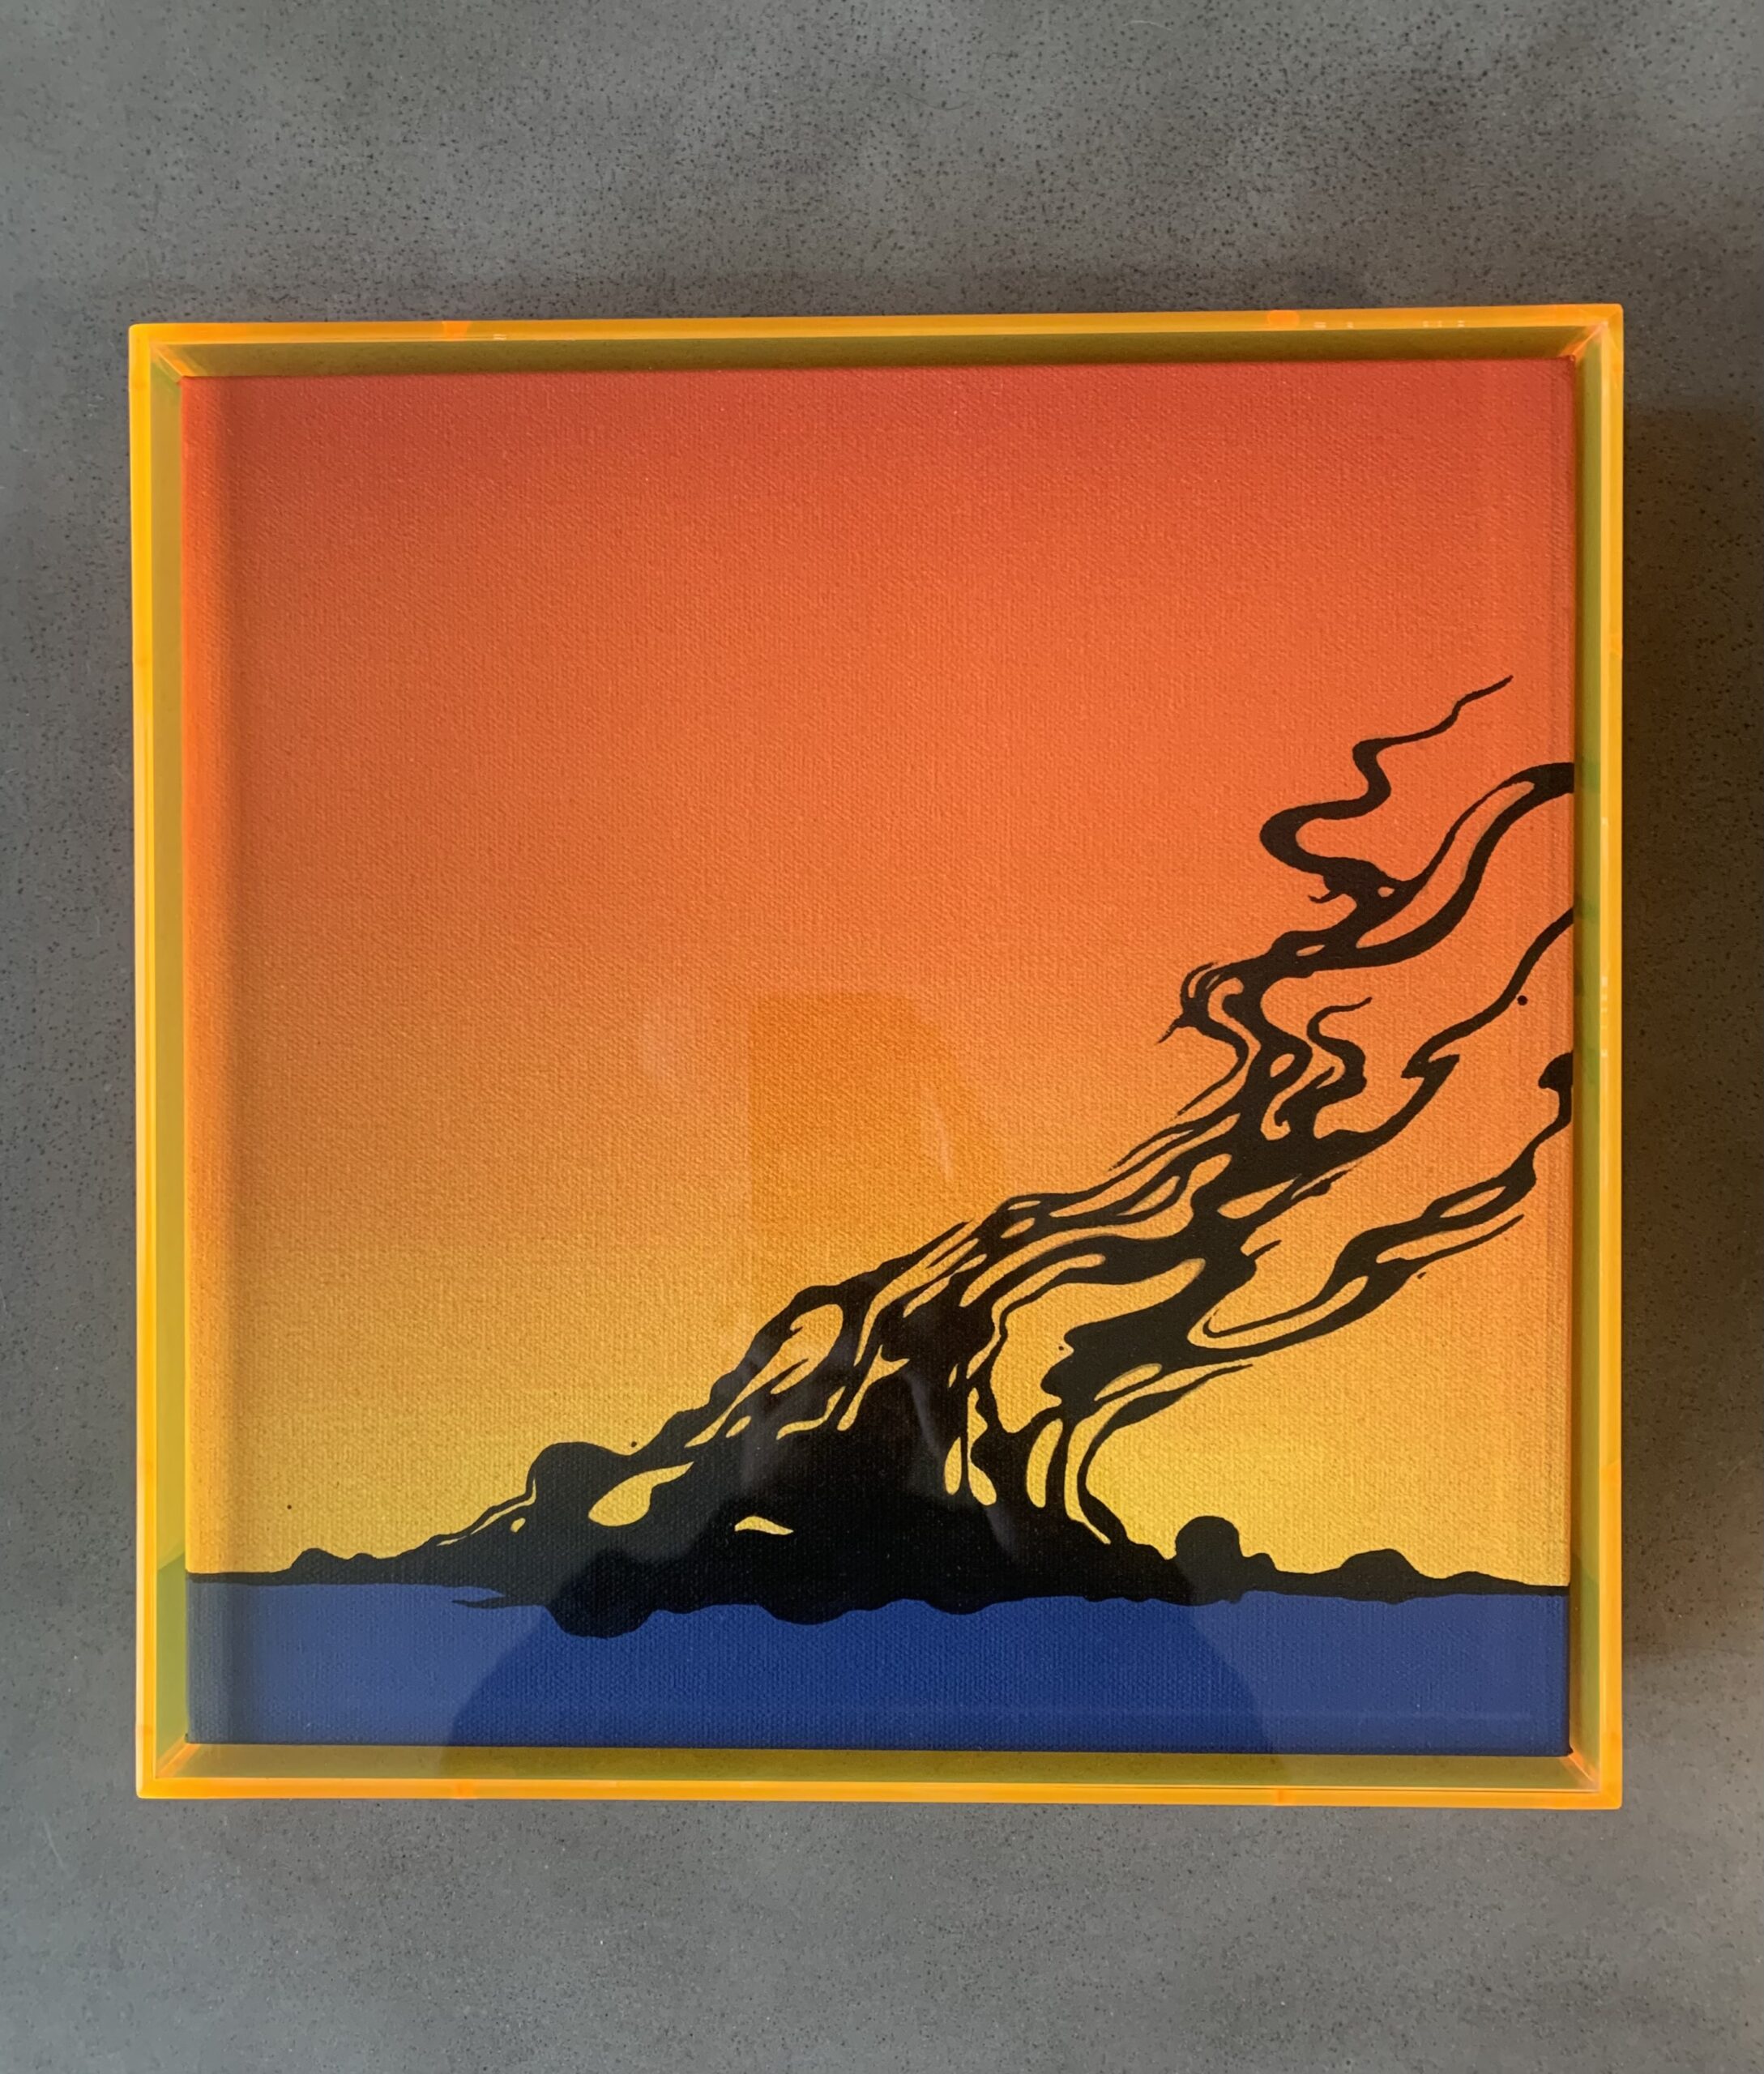 'Day After', 12x12' Gallery Wrapped Canvas inside a Orange Acrylic Case.